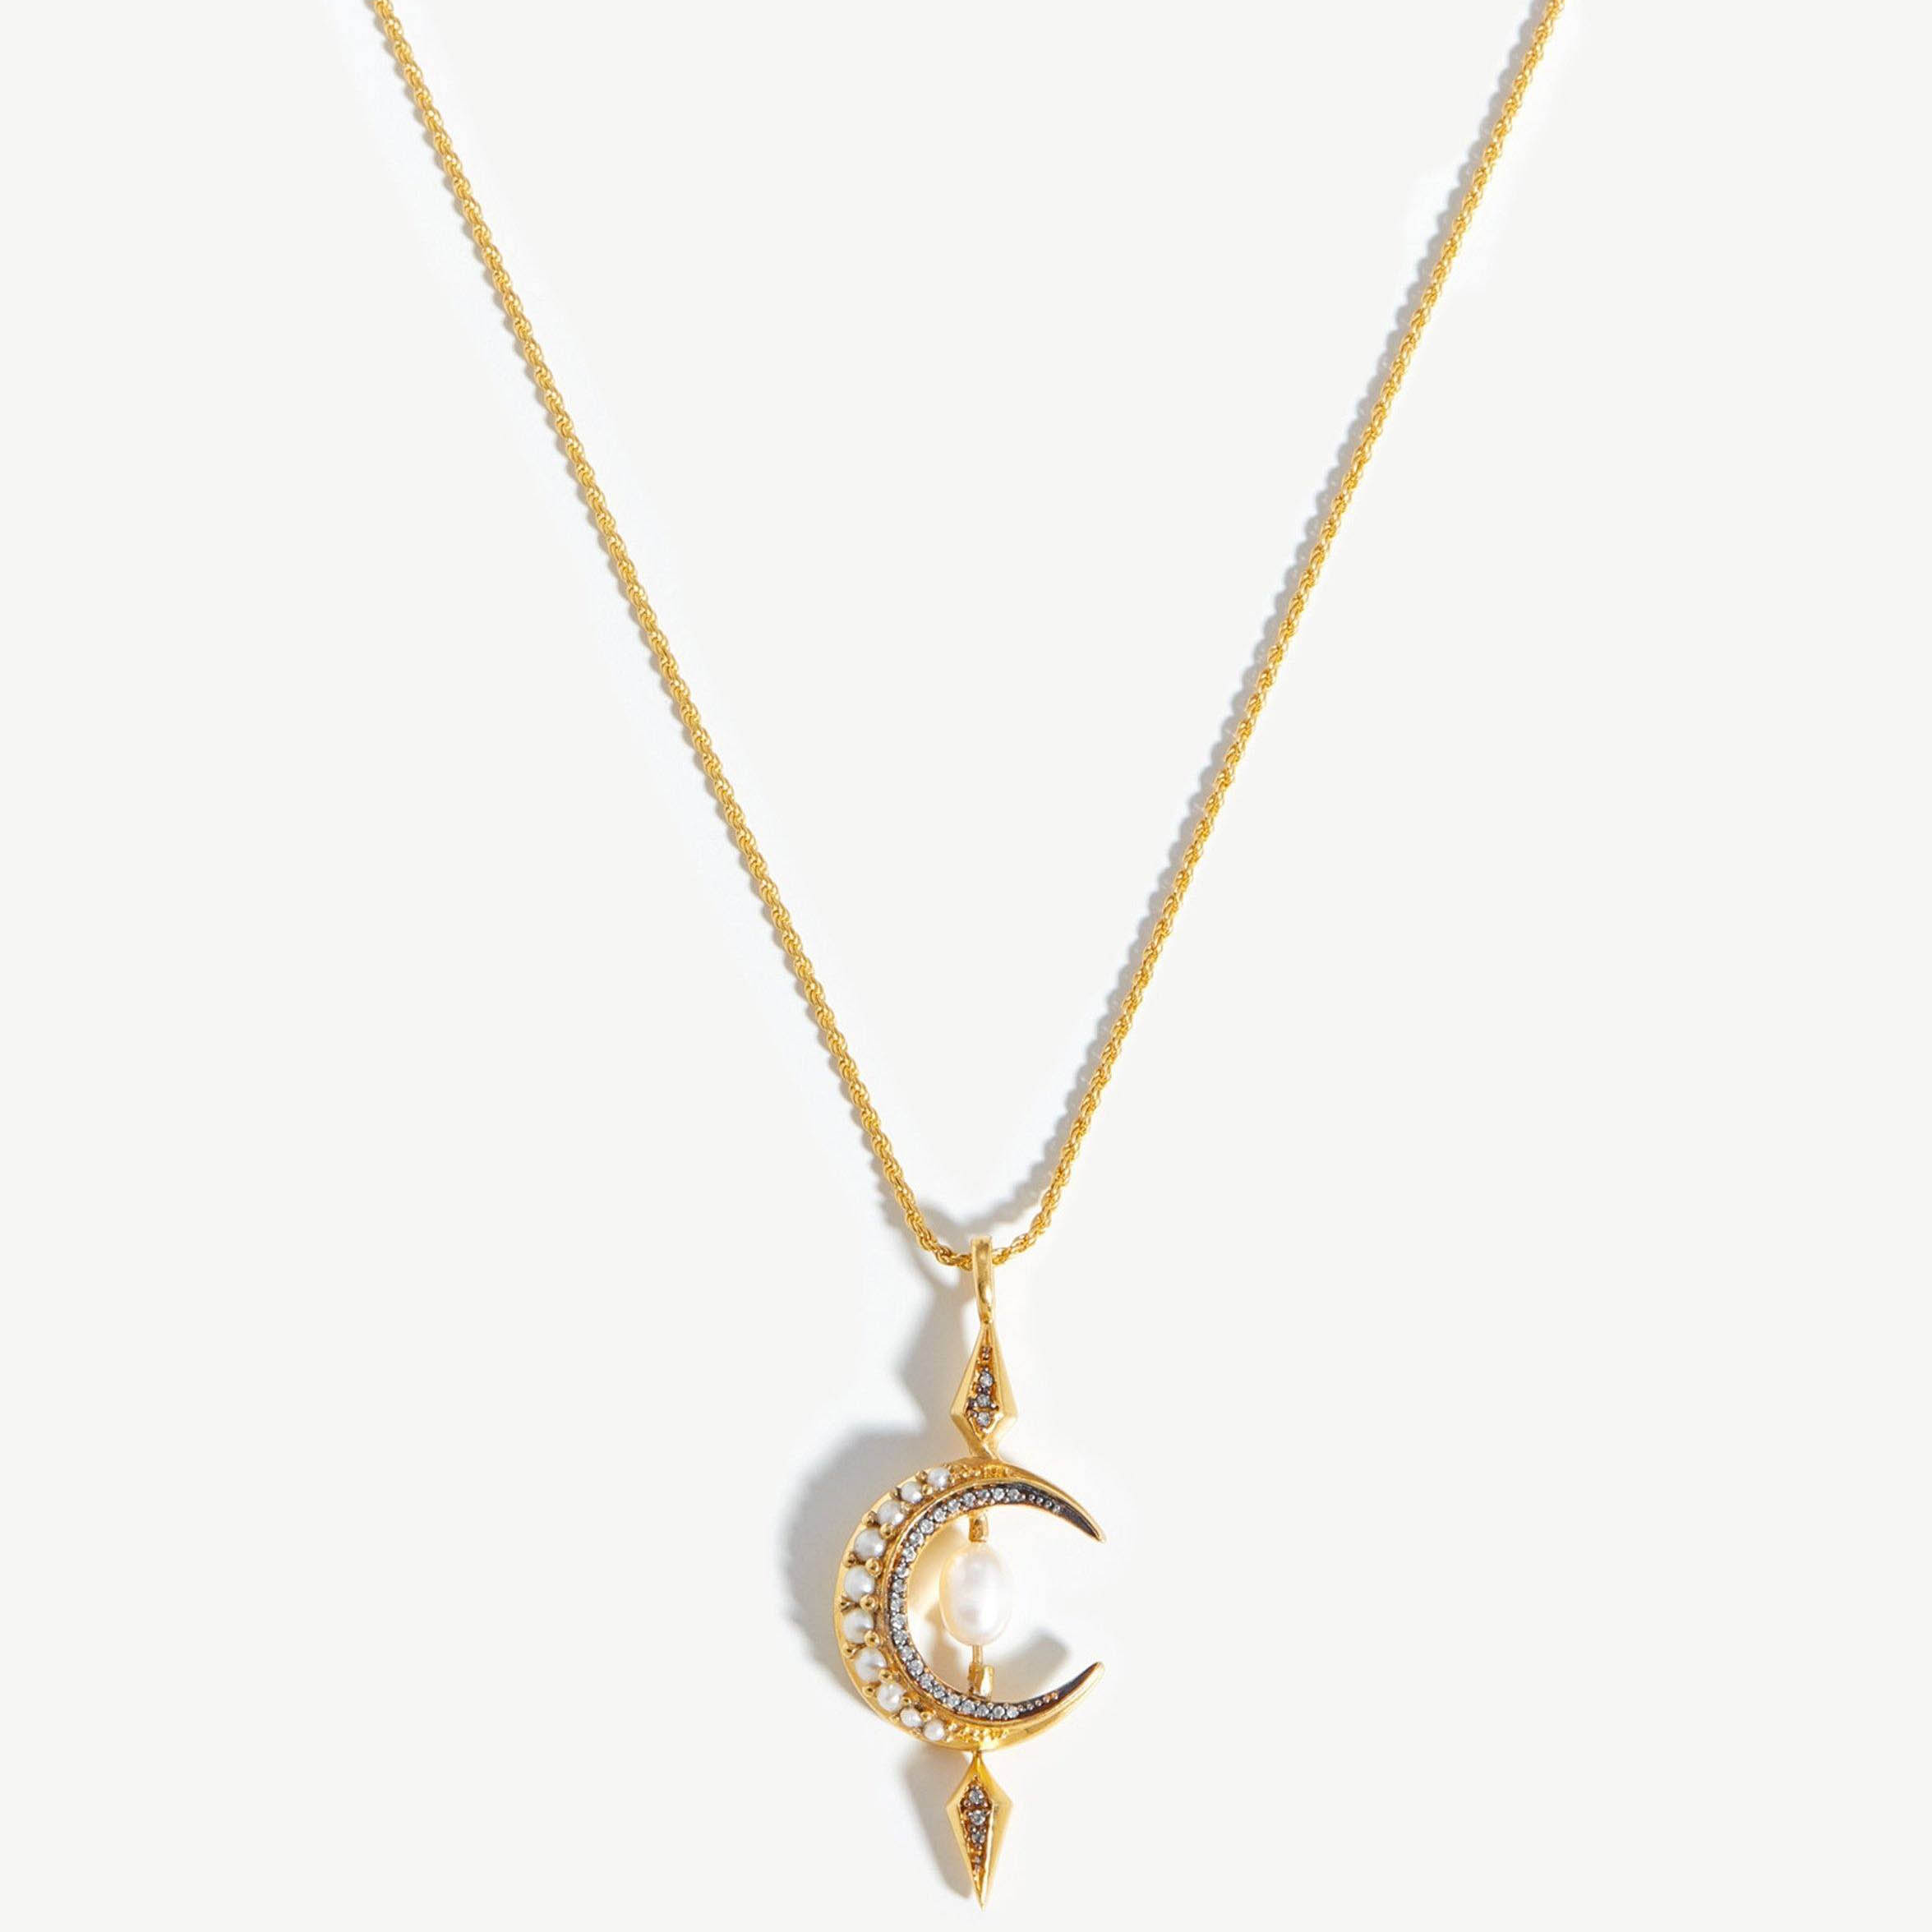 Custom wholesale harris reed crescent moon necklaces 18k gold plated vermeil pearl